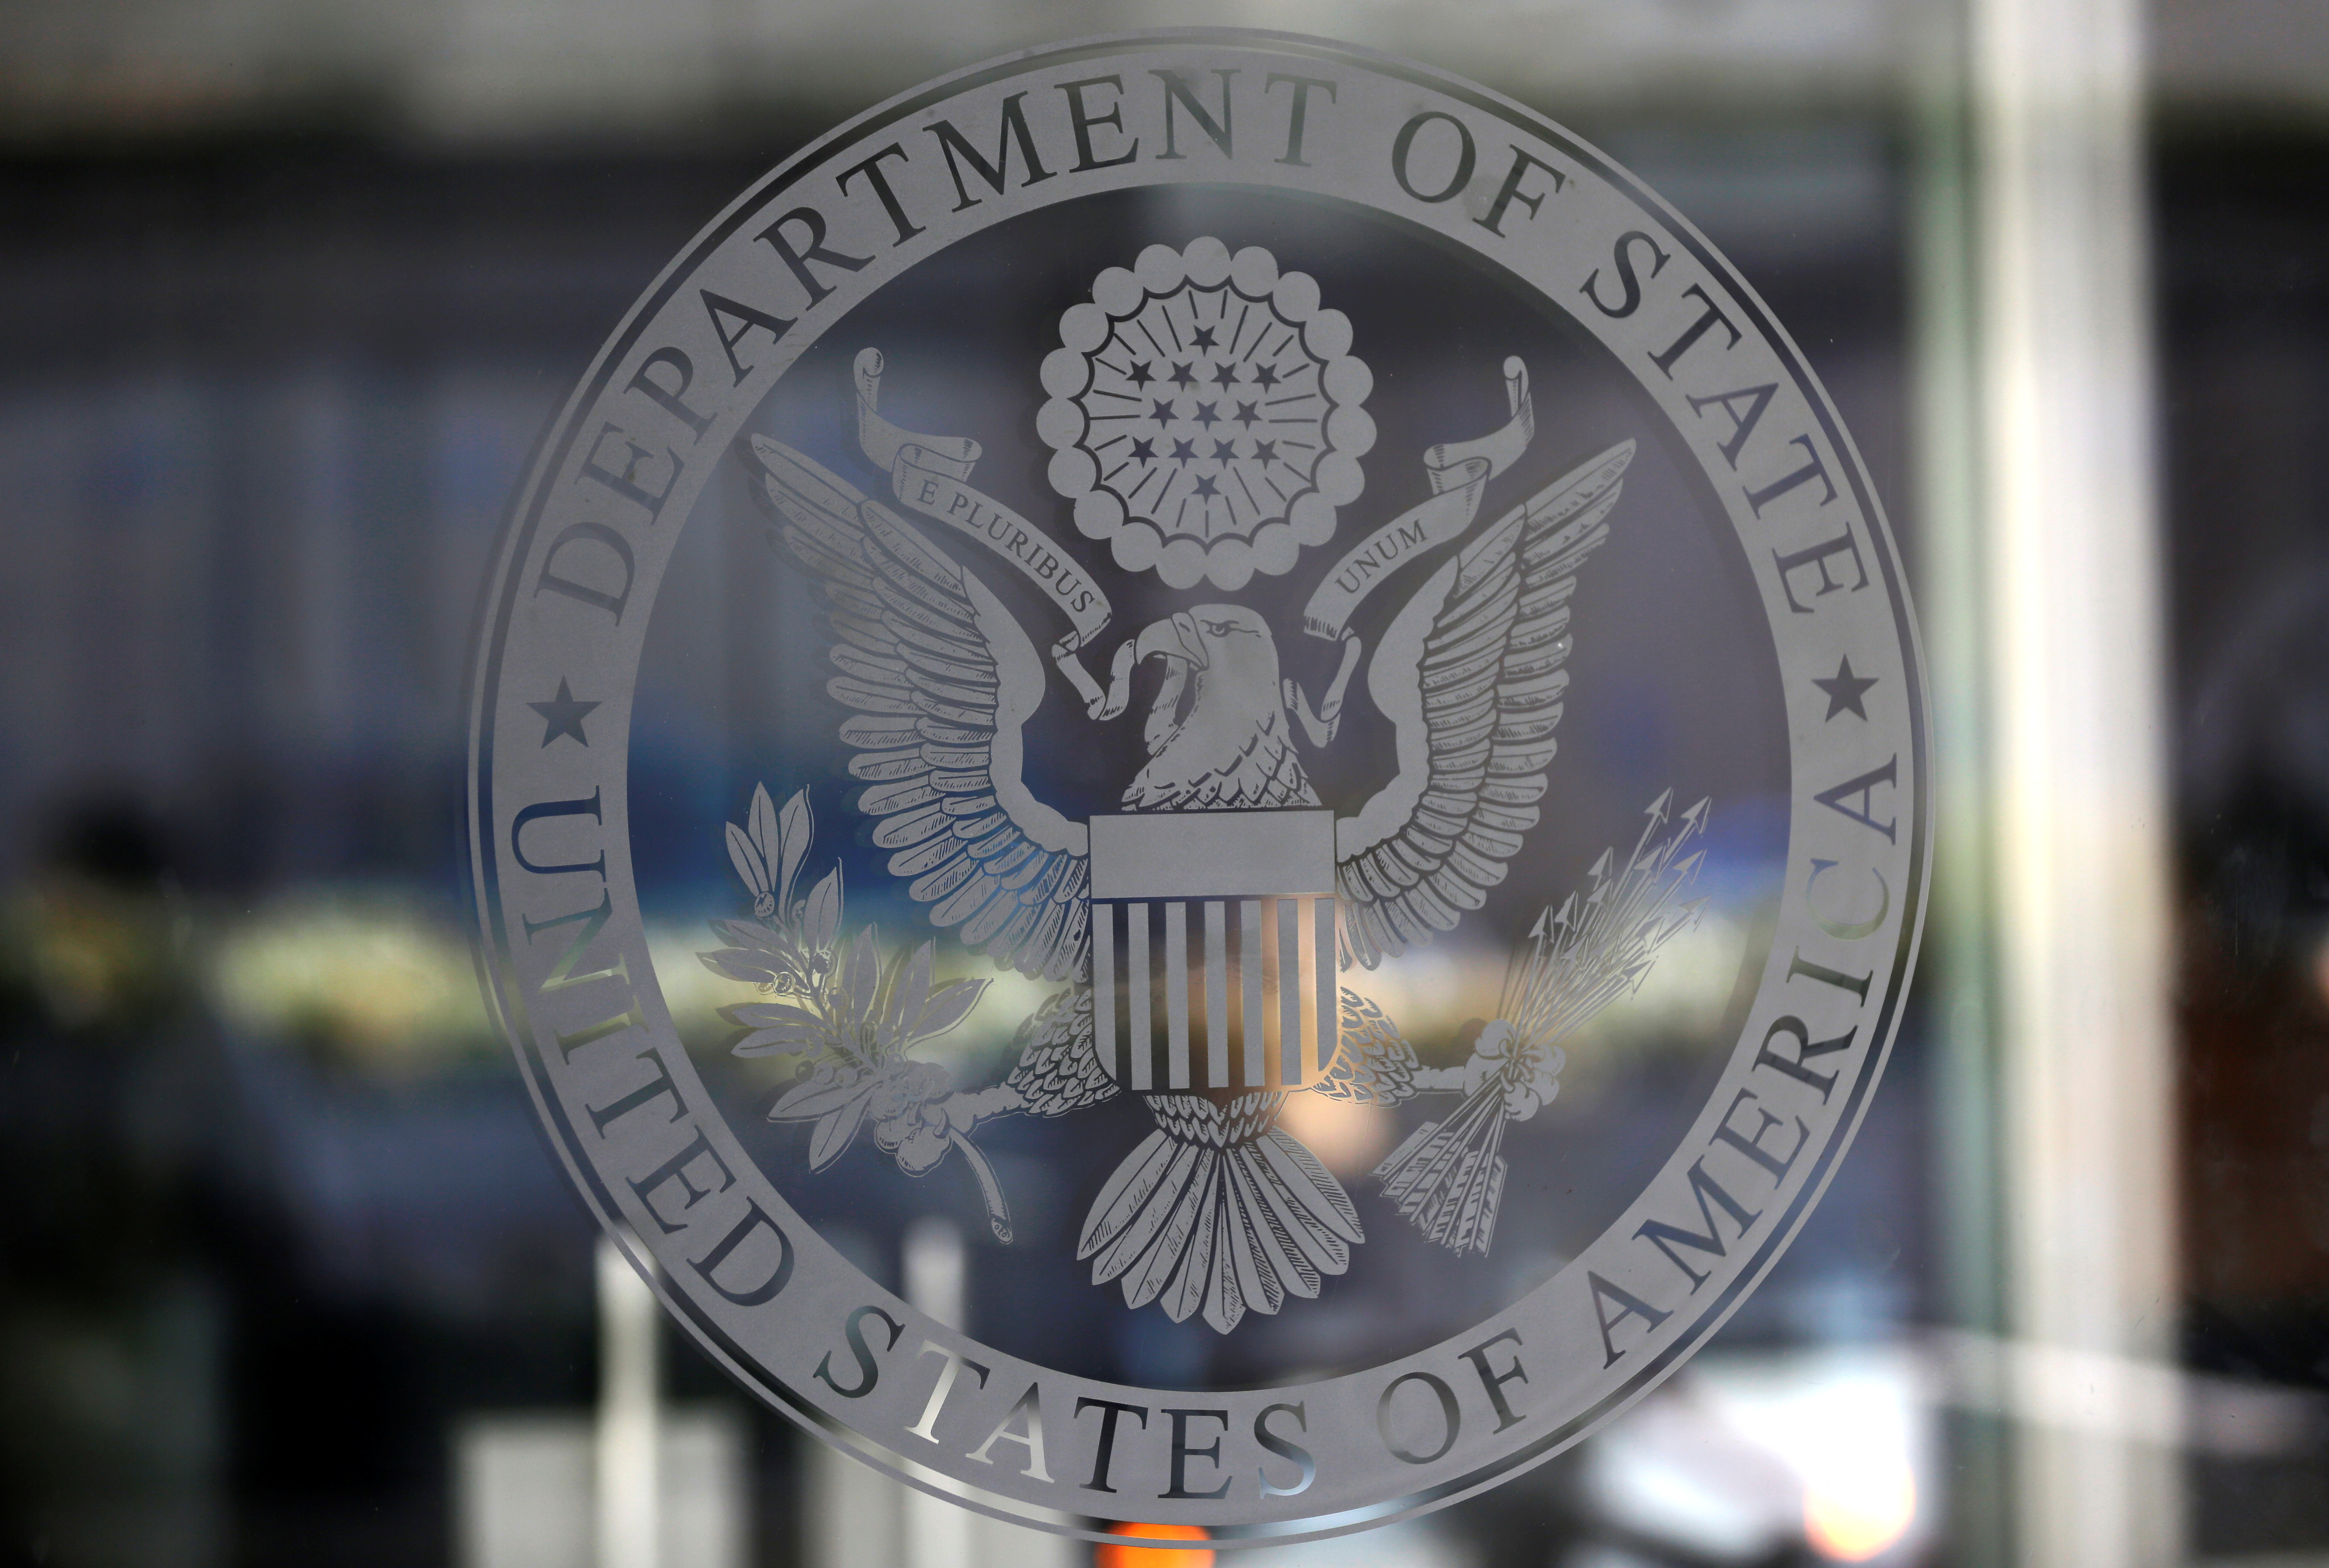 The seal of the United States Department of State is seen in Washington